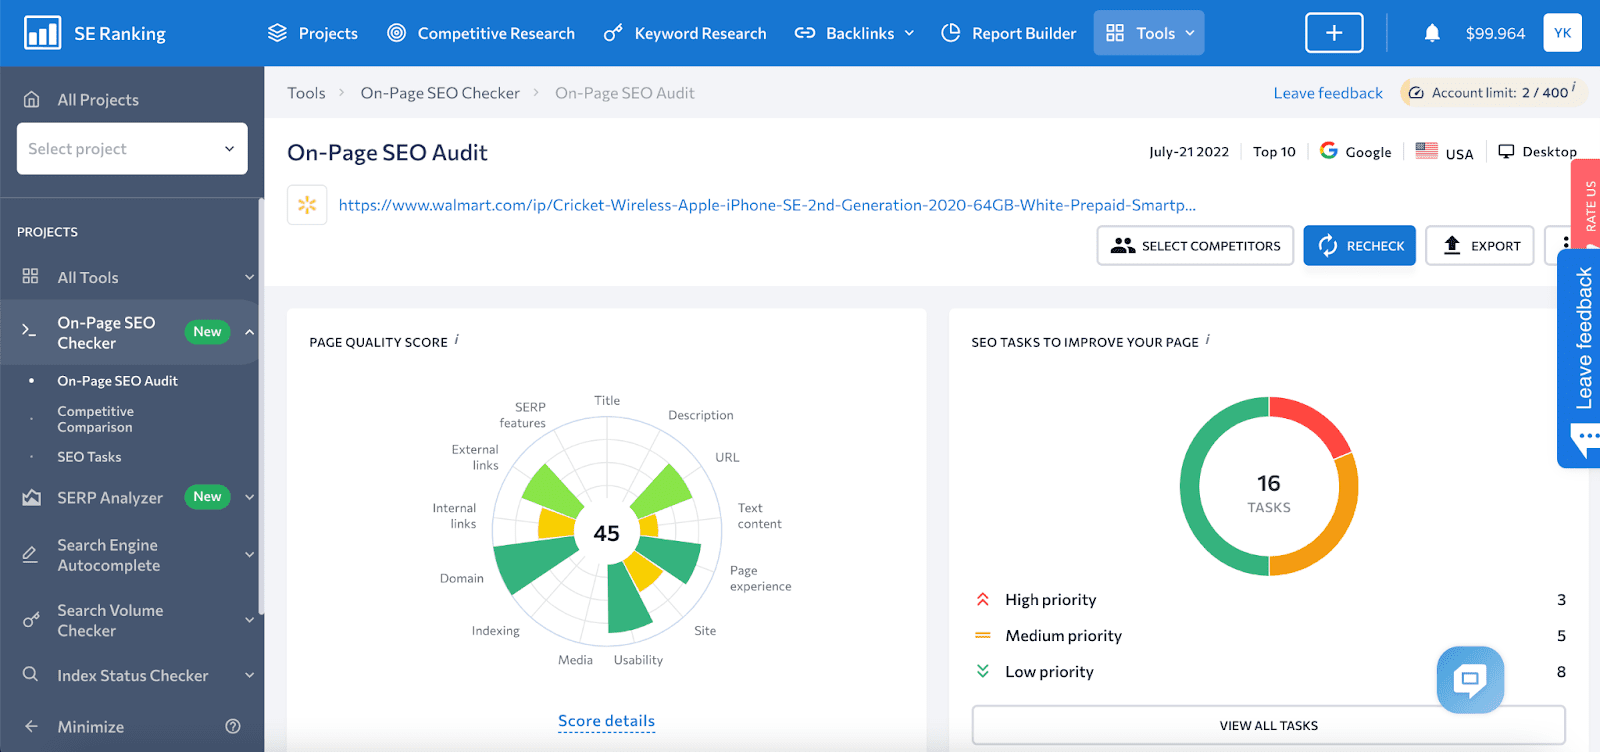 On-Page SEO audit overview